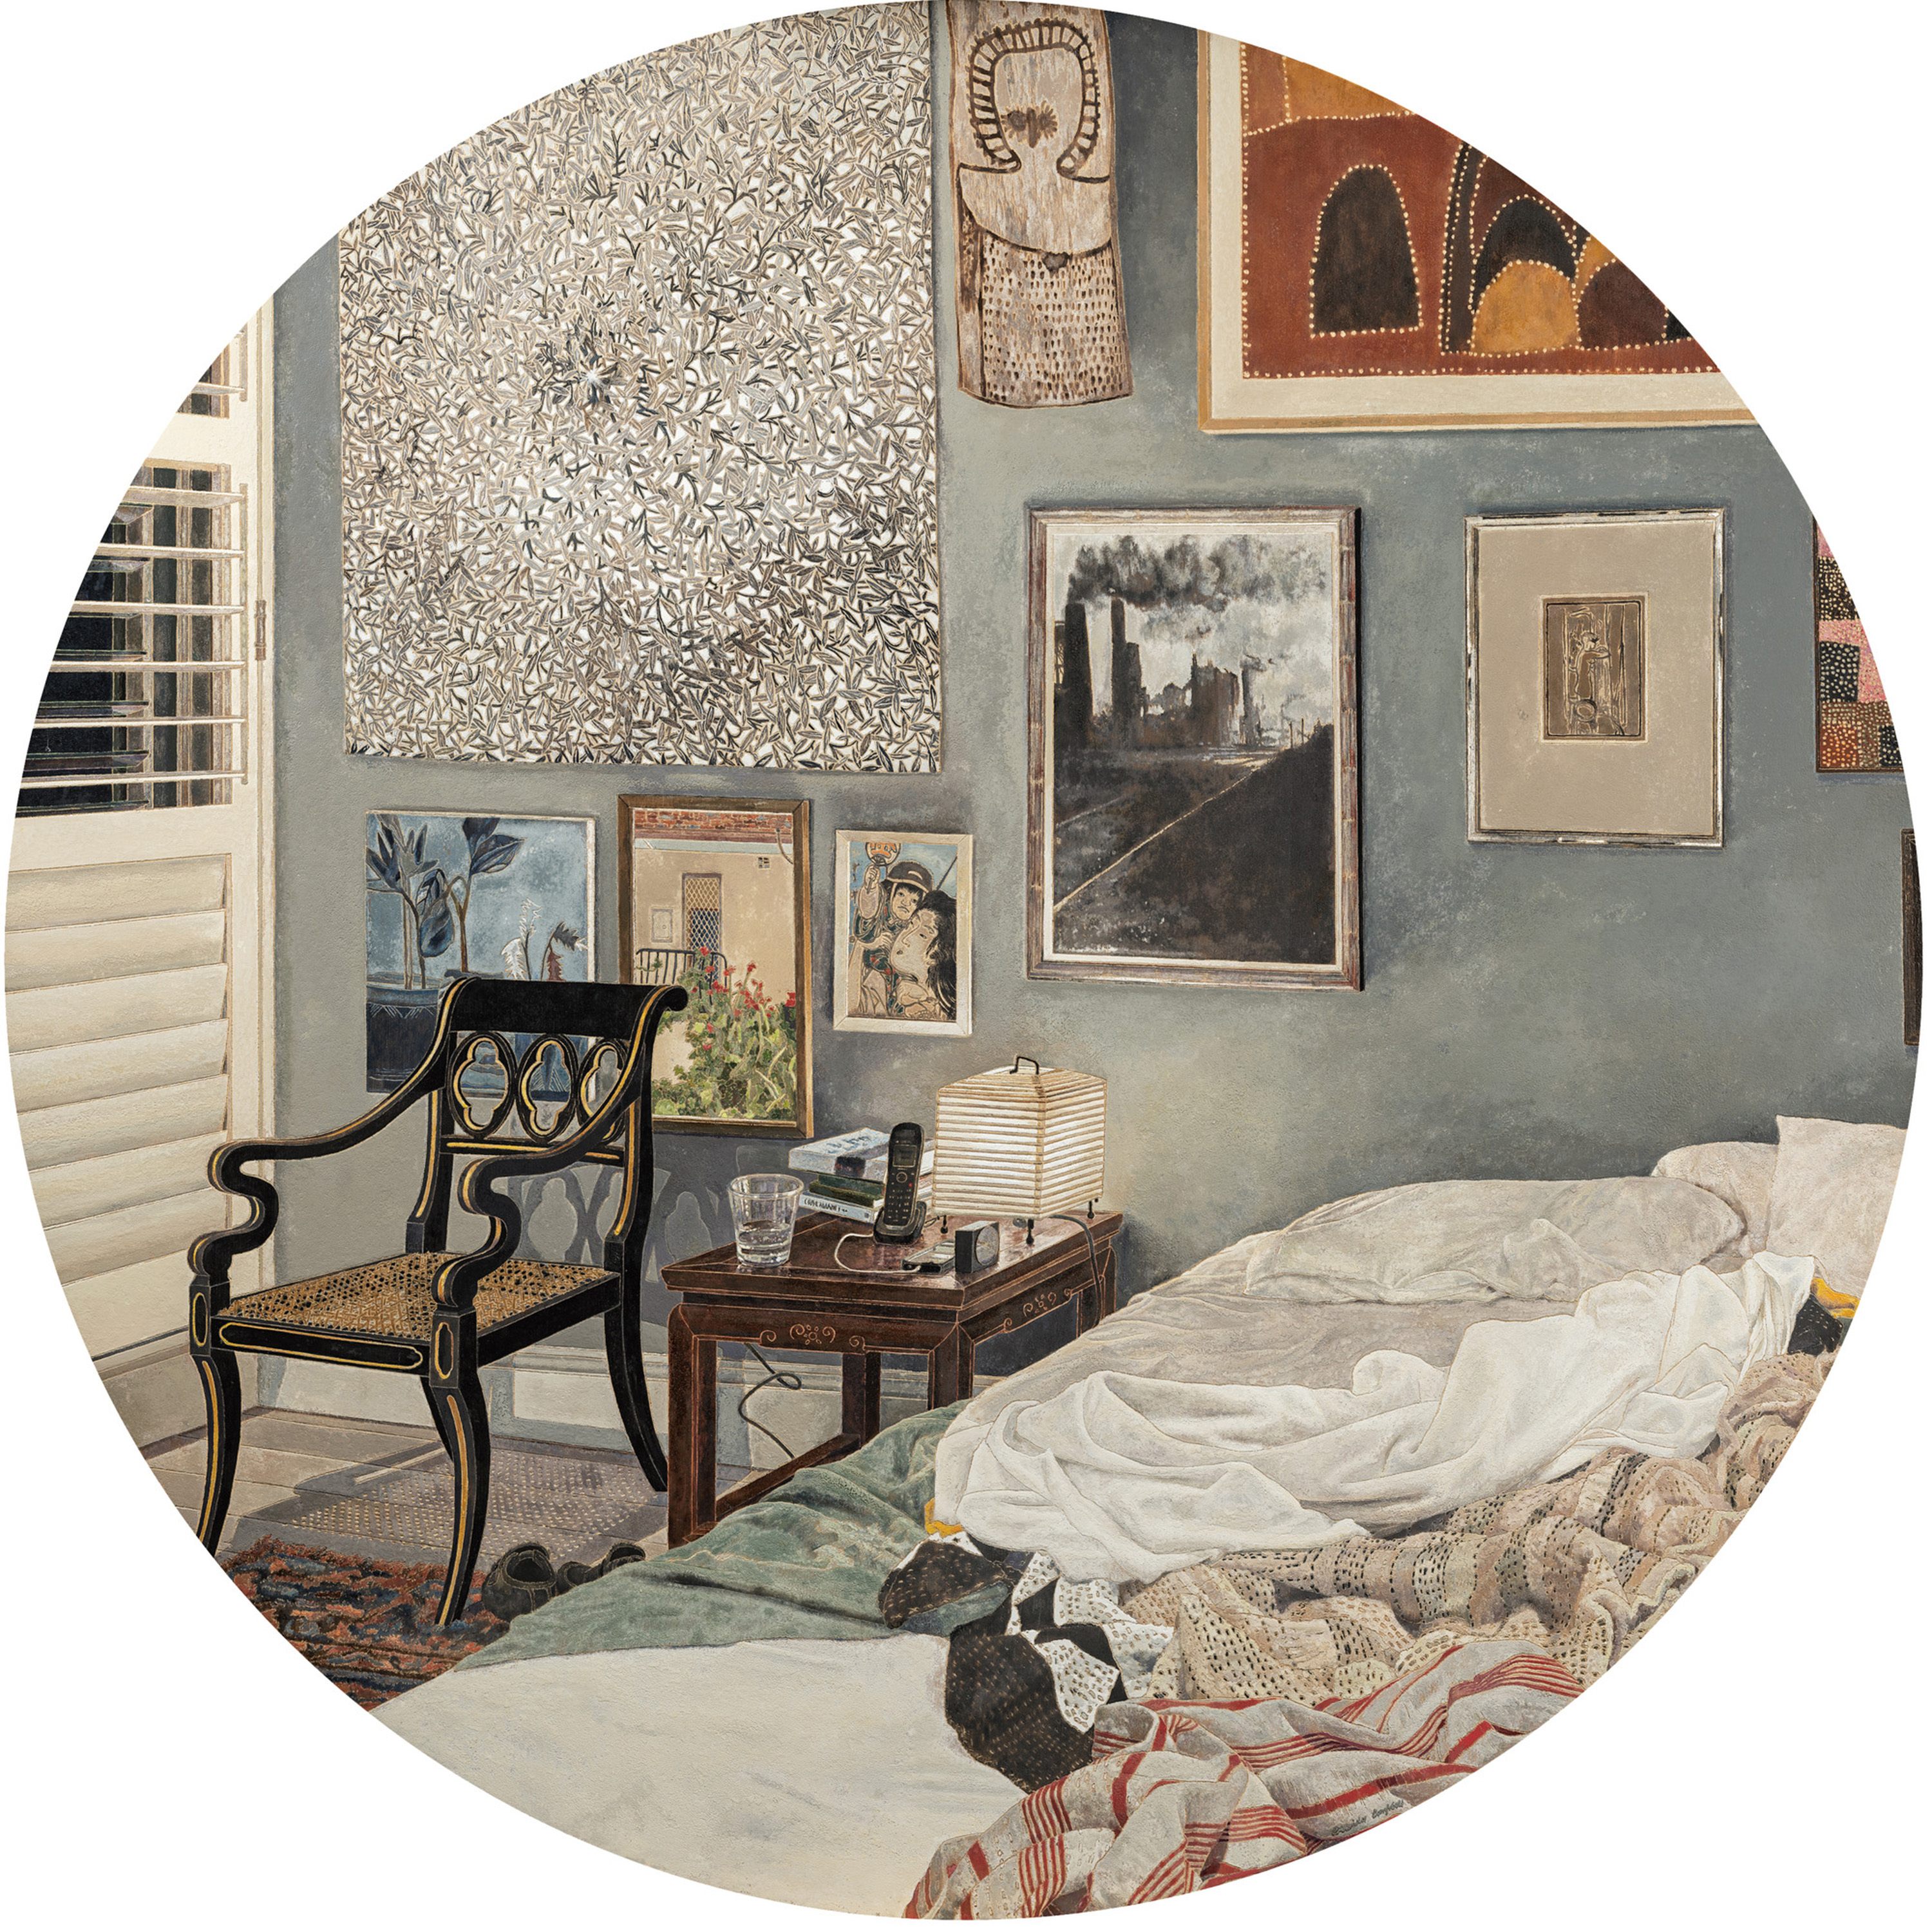 A circular drawing of a bedroom including a sleeping bed, a bedside table, a chair and a wall covered in art